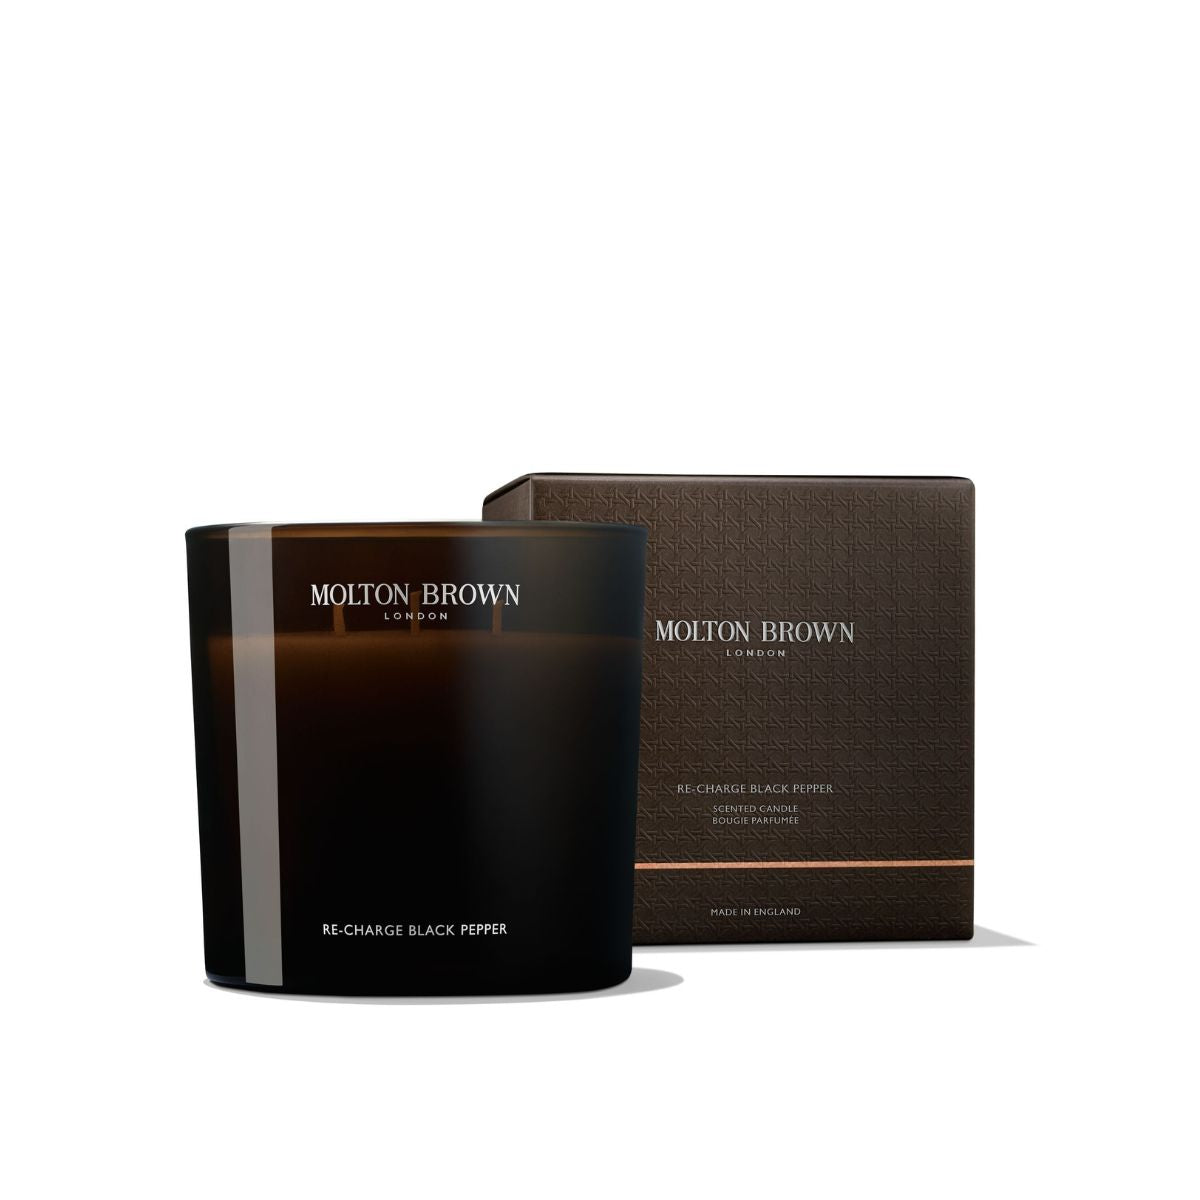 Molton Brown Re-Charge Black Pepper Luxury Scented Triple Wick Candle